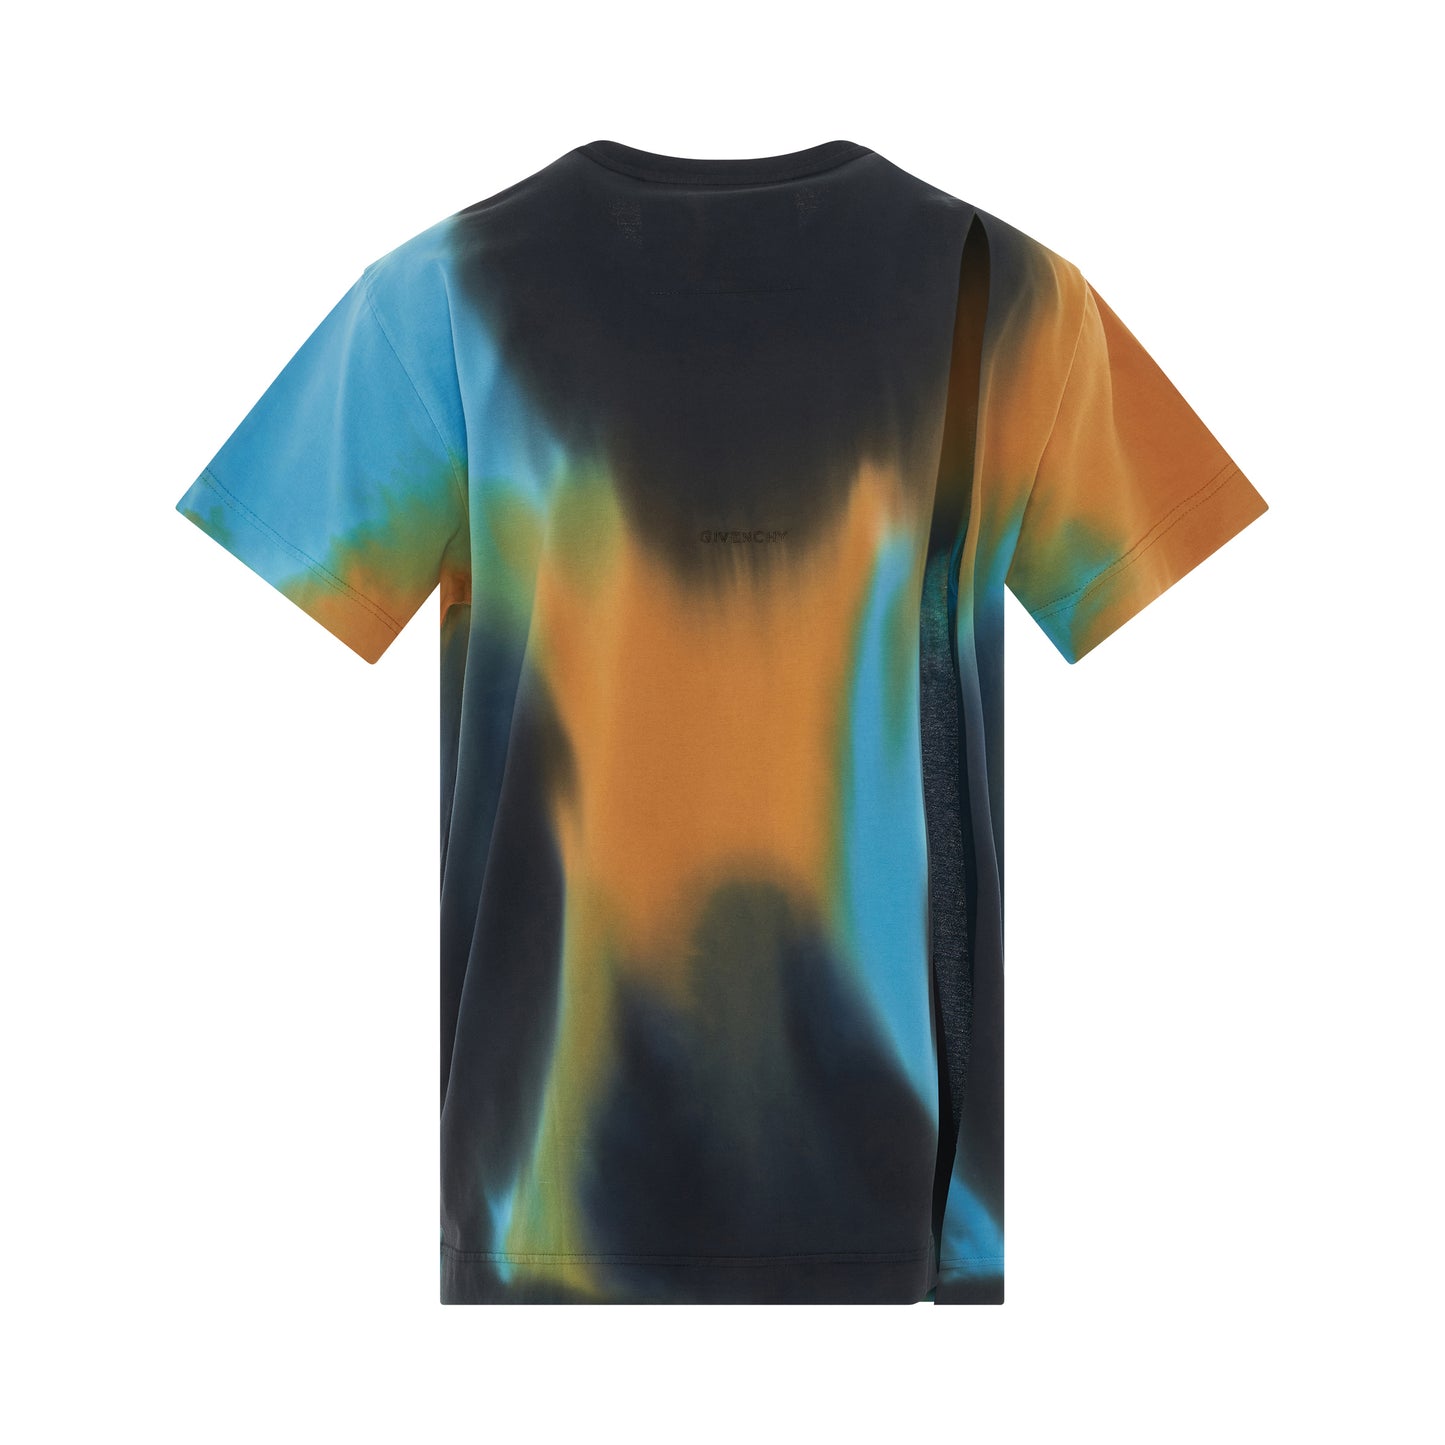 4G Embroidered Oversized Tiedye Back Cut T-Shirt in Black/Blue